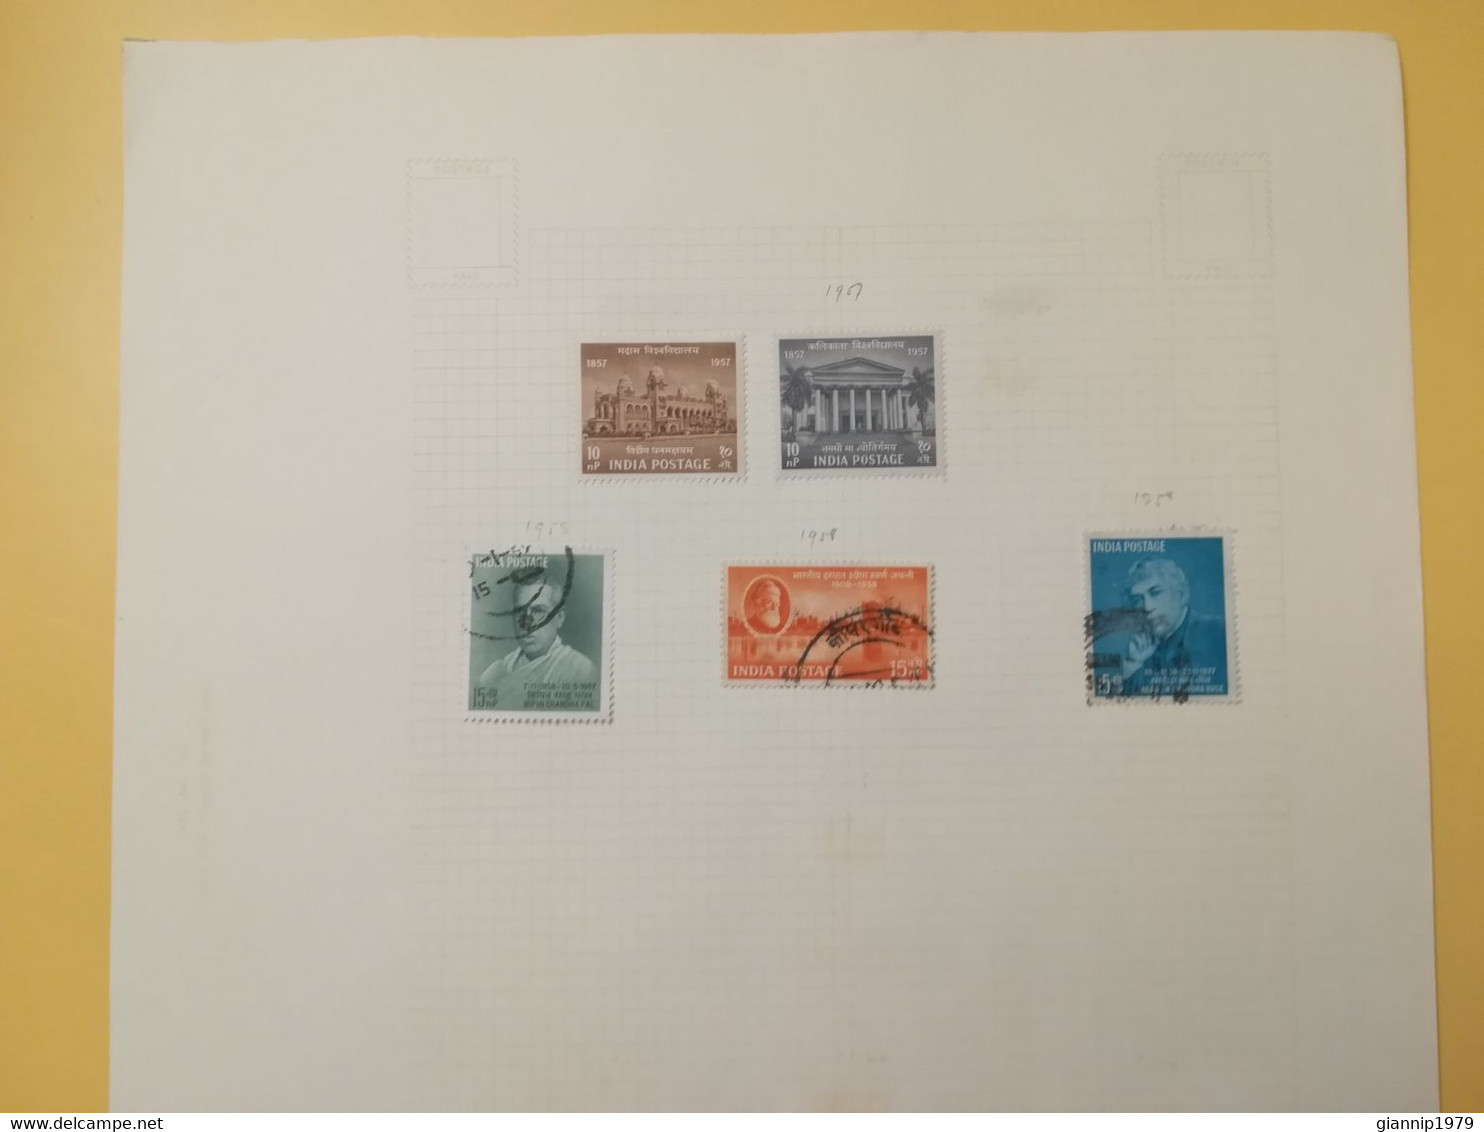 PAGINA PAGE ALBUM INDIA 1955 ATTACCATI PAGE WITH STAMPS COLLEZIONI LOTTO LOT LOTS - Collections, Lots & Series